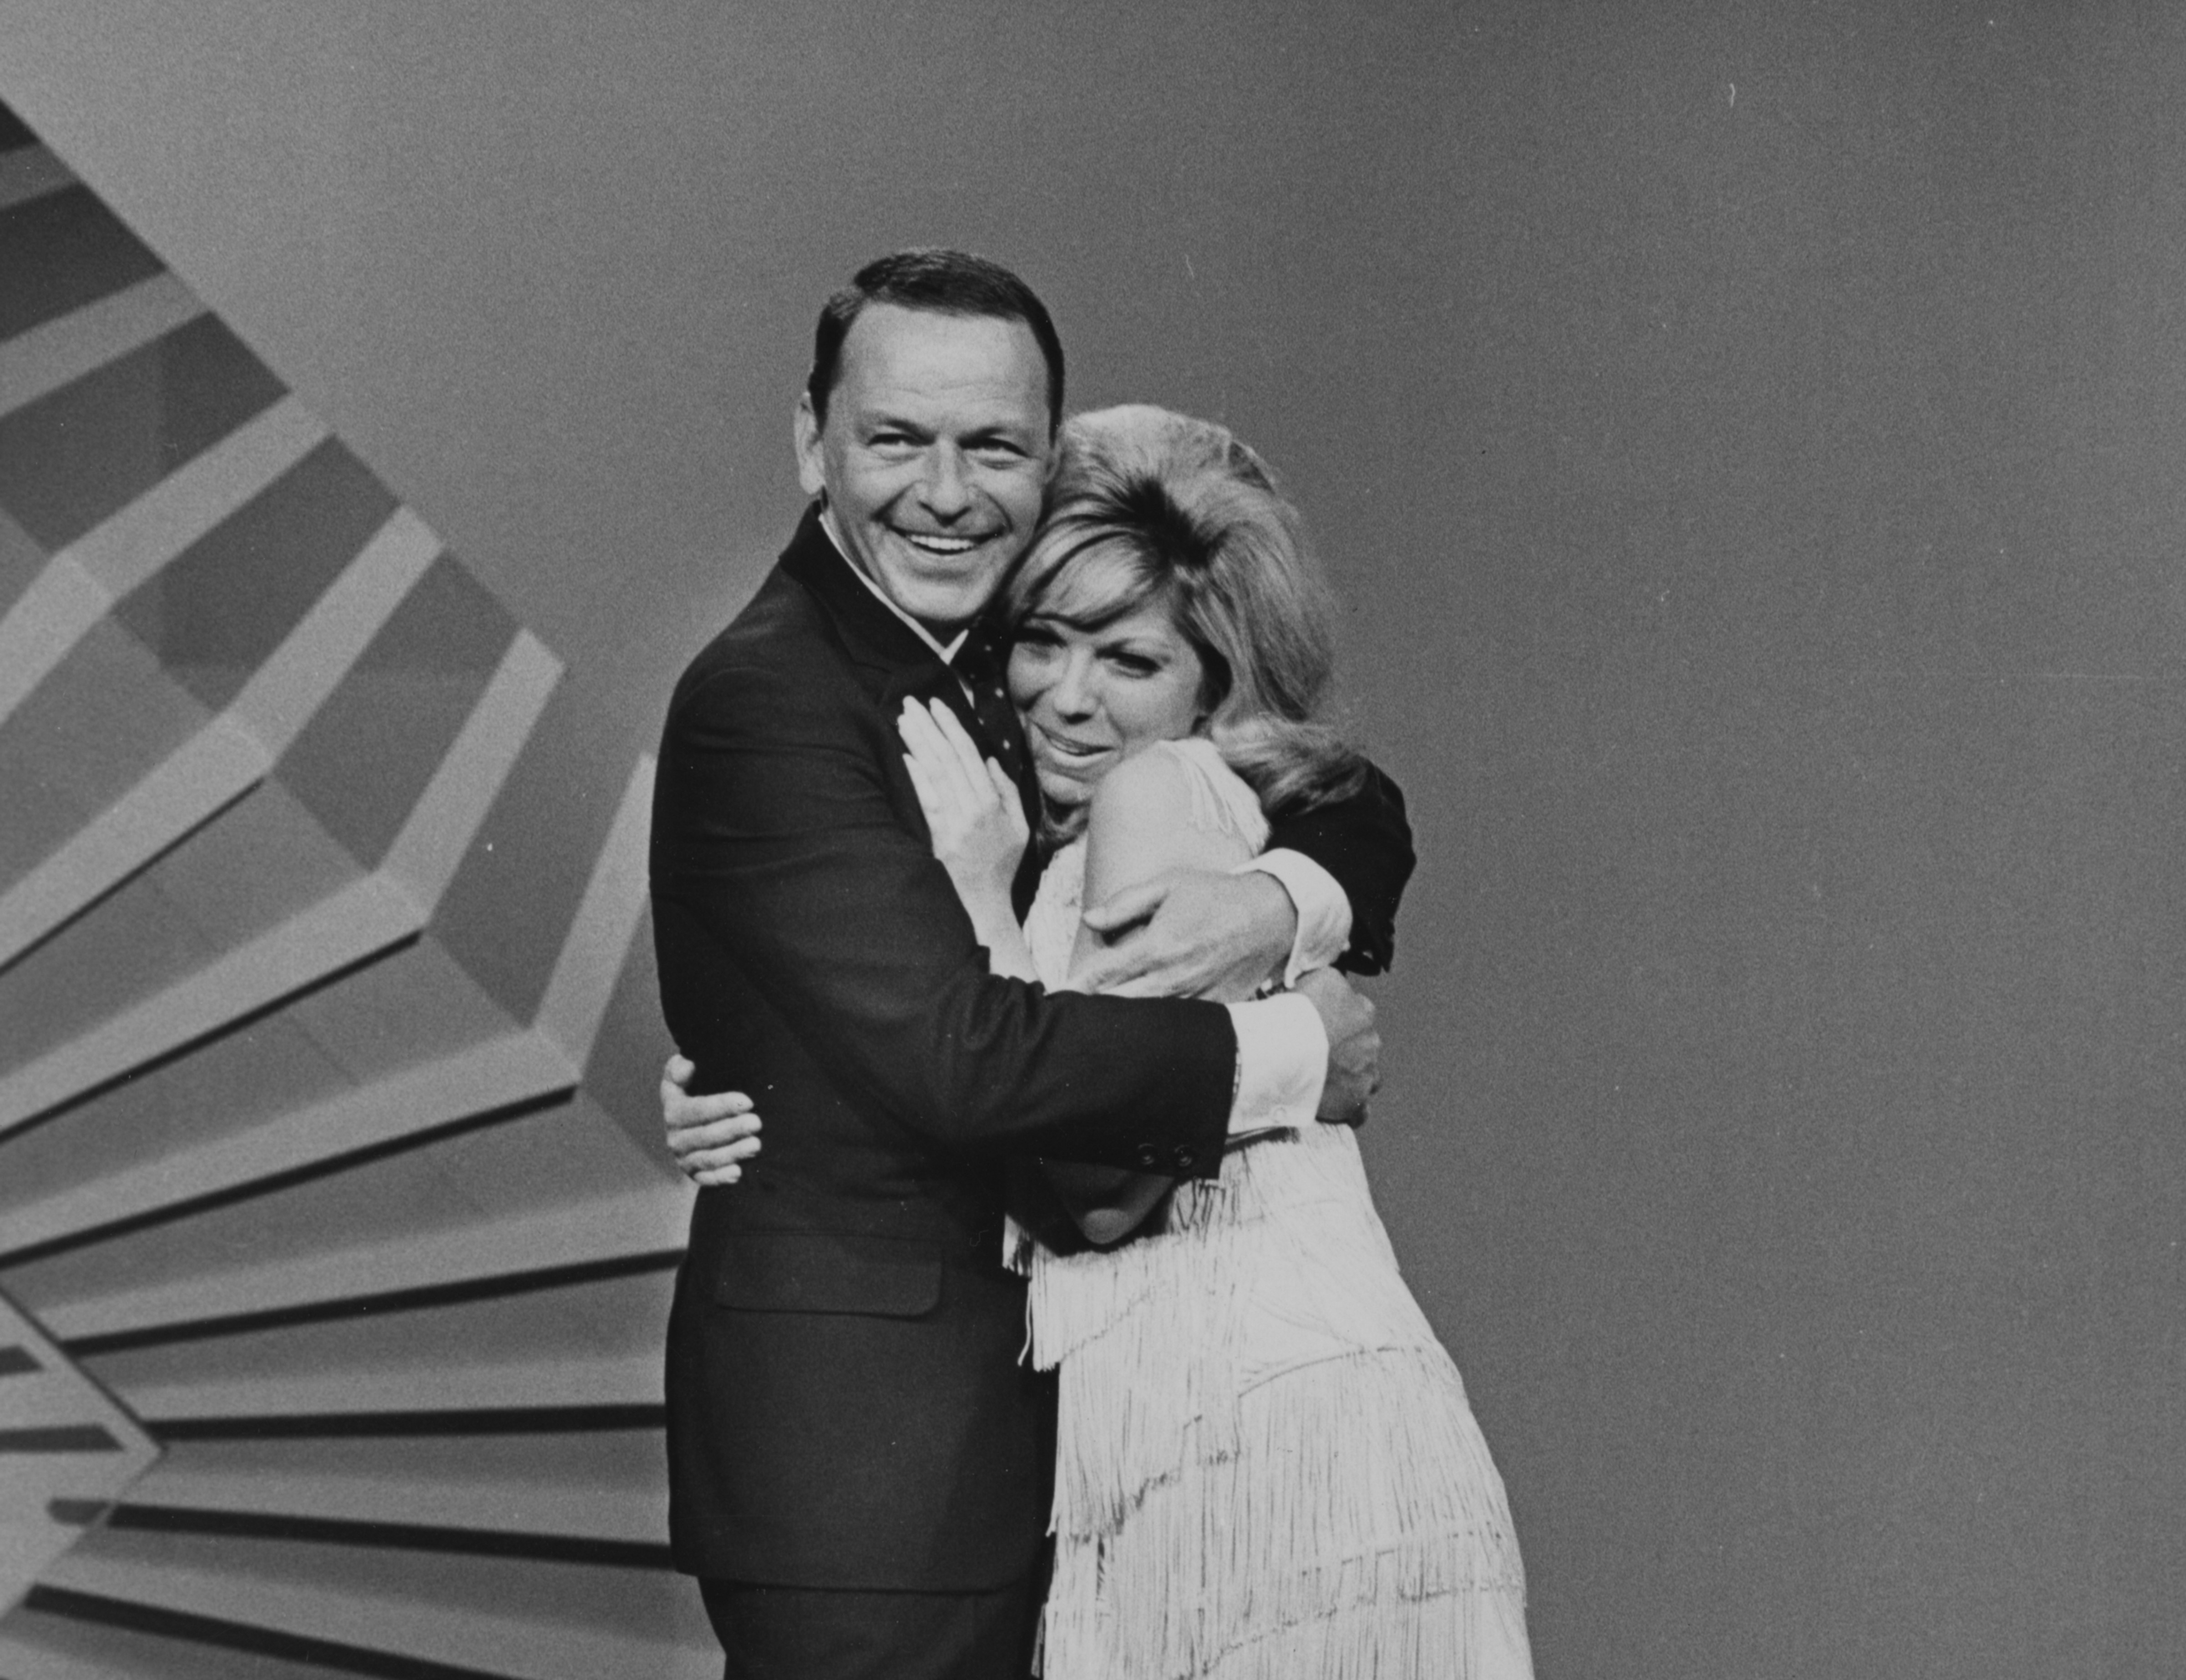 Frank Sinatra and his daughter Nancy Sinatra embrace.